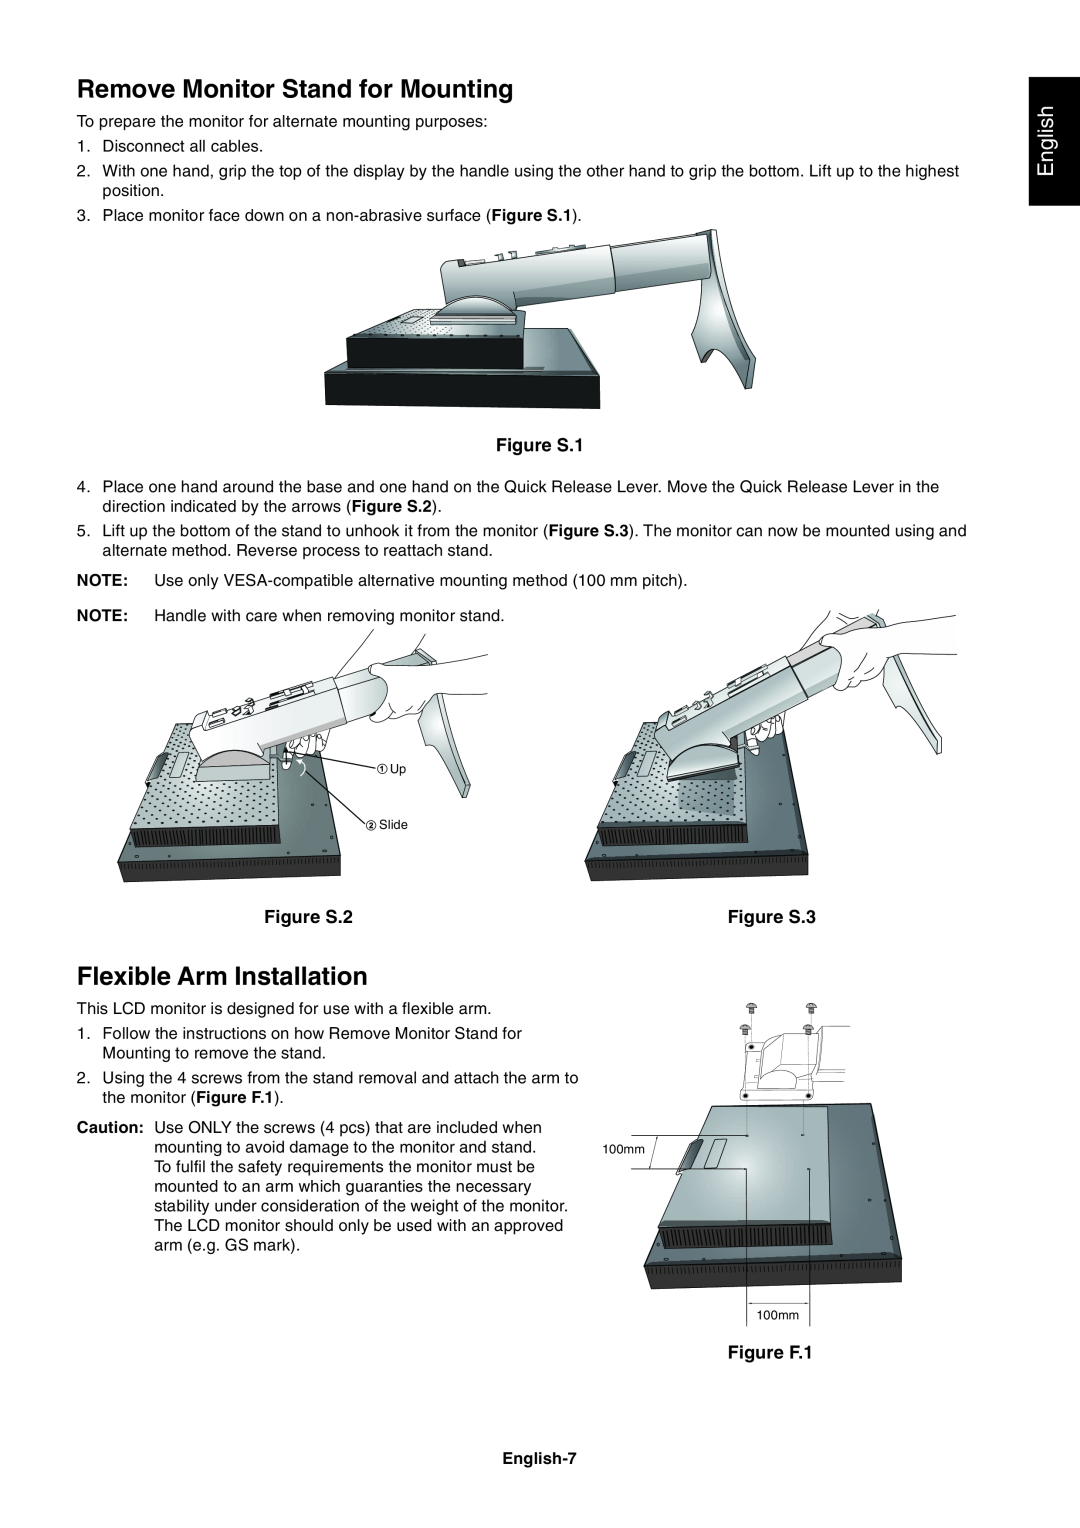 NEC LCD1990FXp Remove Monitor Stand for Mounting, Flexible Arm Installation, English, Figure S.1, Figure S.2, Figure S.3 